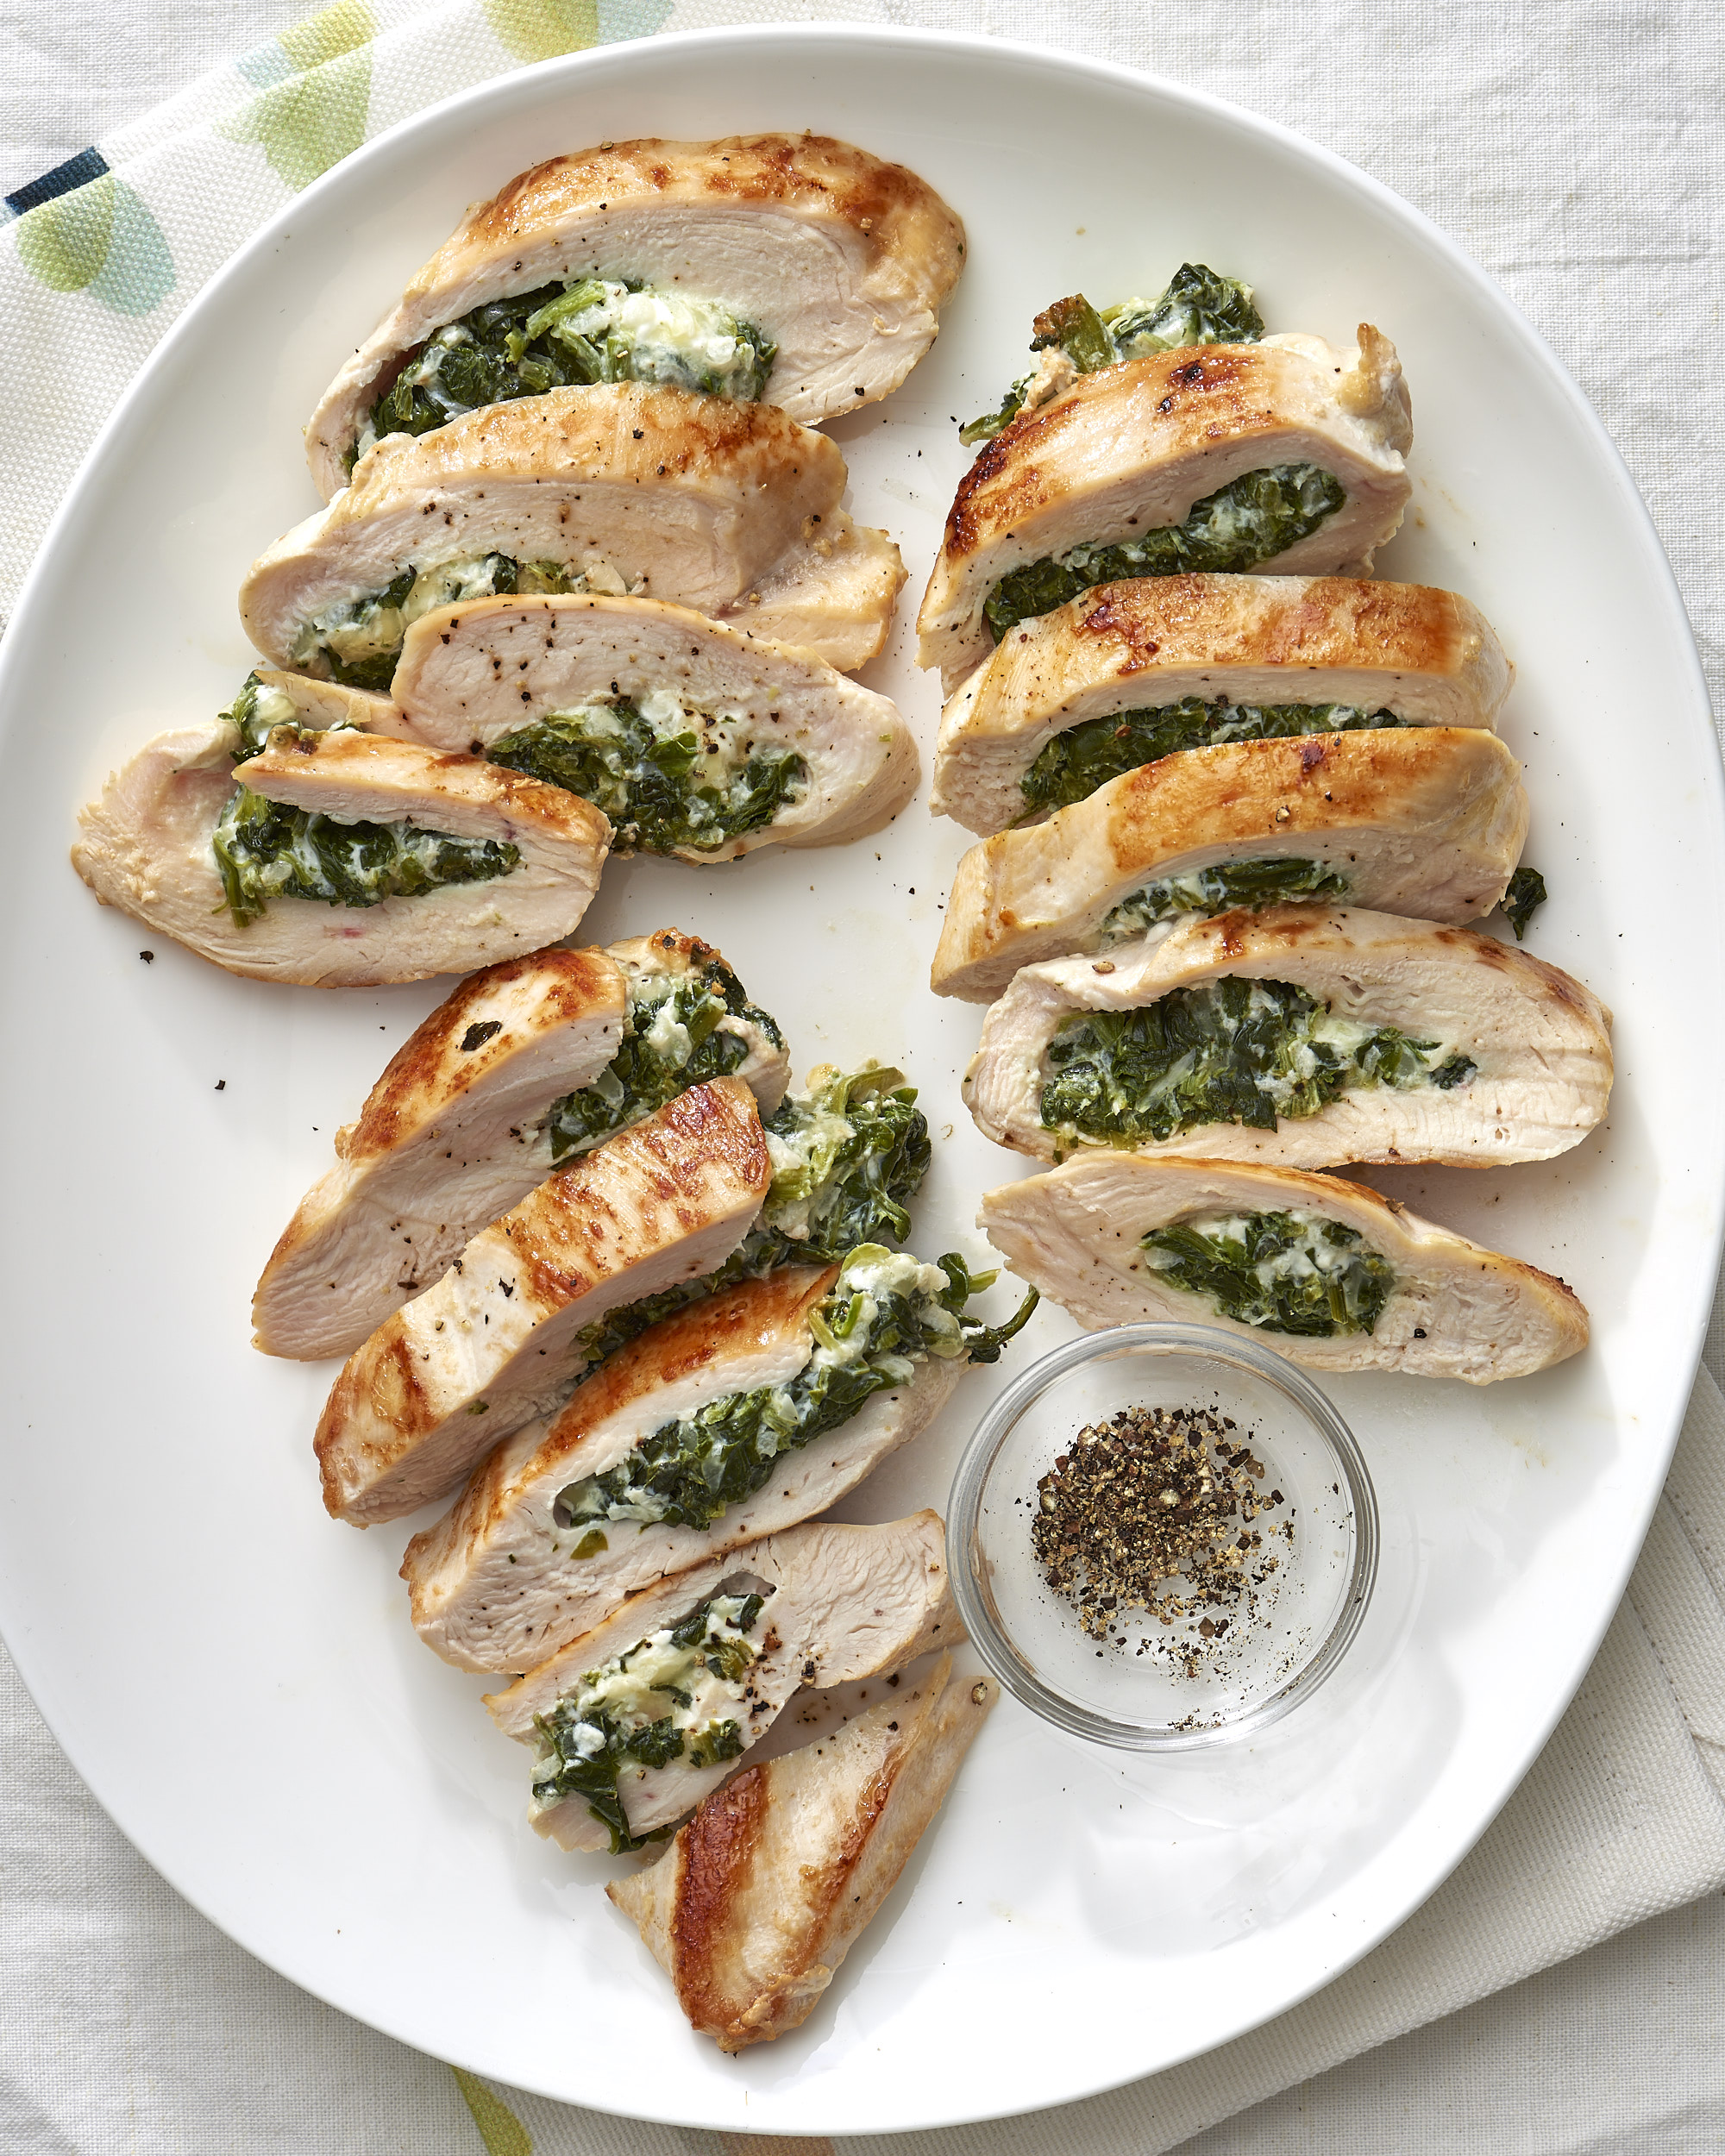 Recipe for stuffed chicken breast with spinach